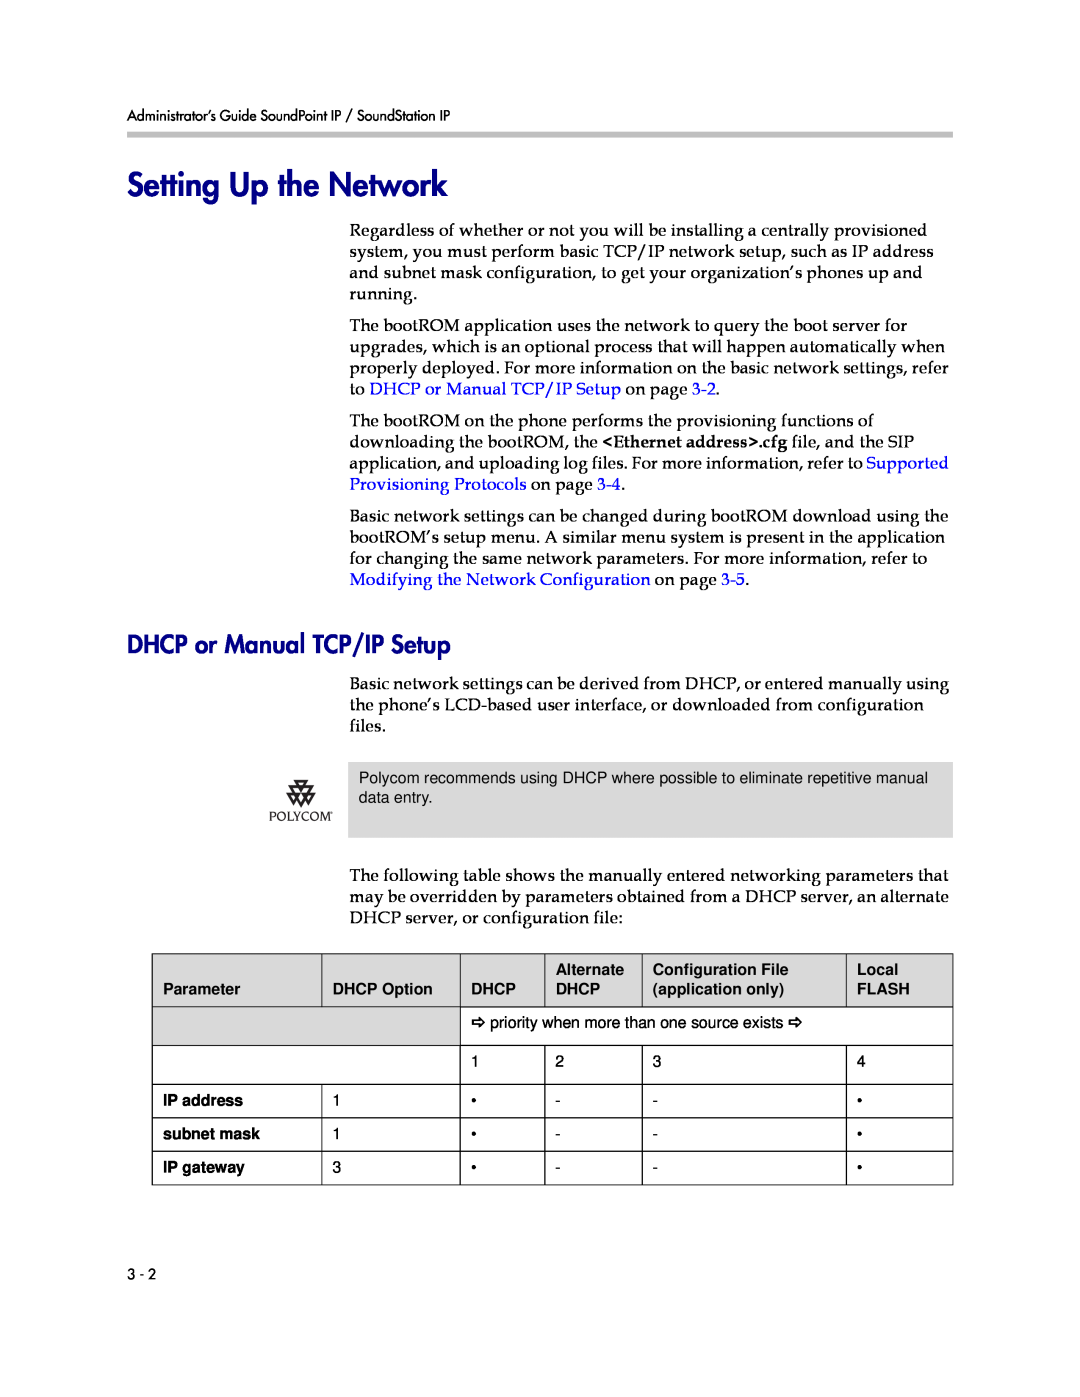 Polycom SIP 3.1 manual Setting Up the Network, DHCP or Manual TCP/IP Setup 